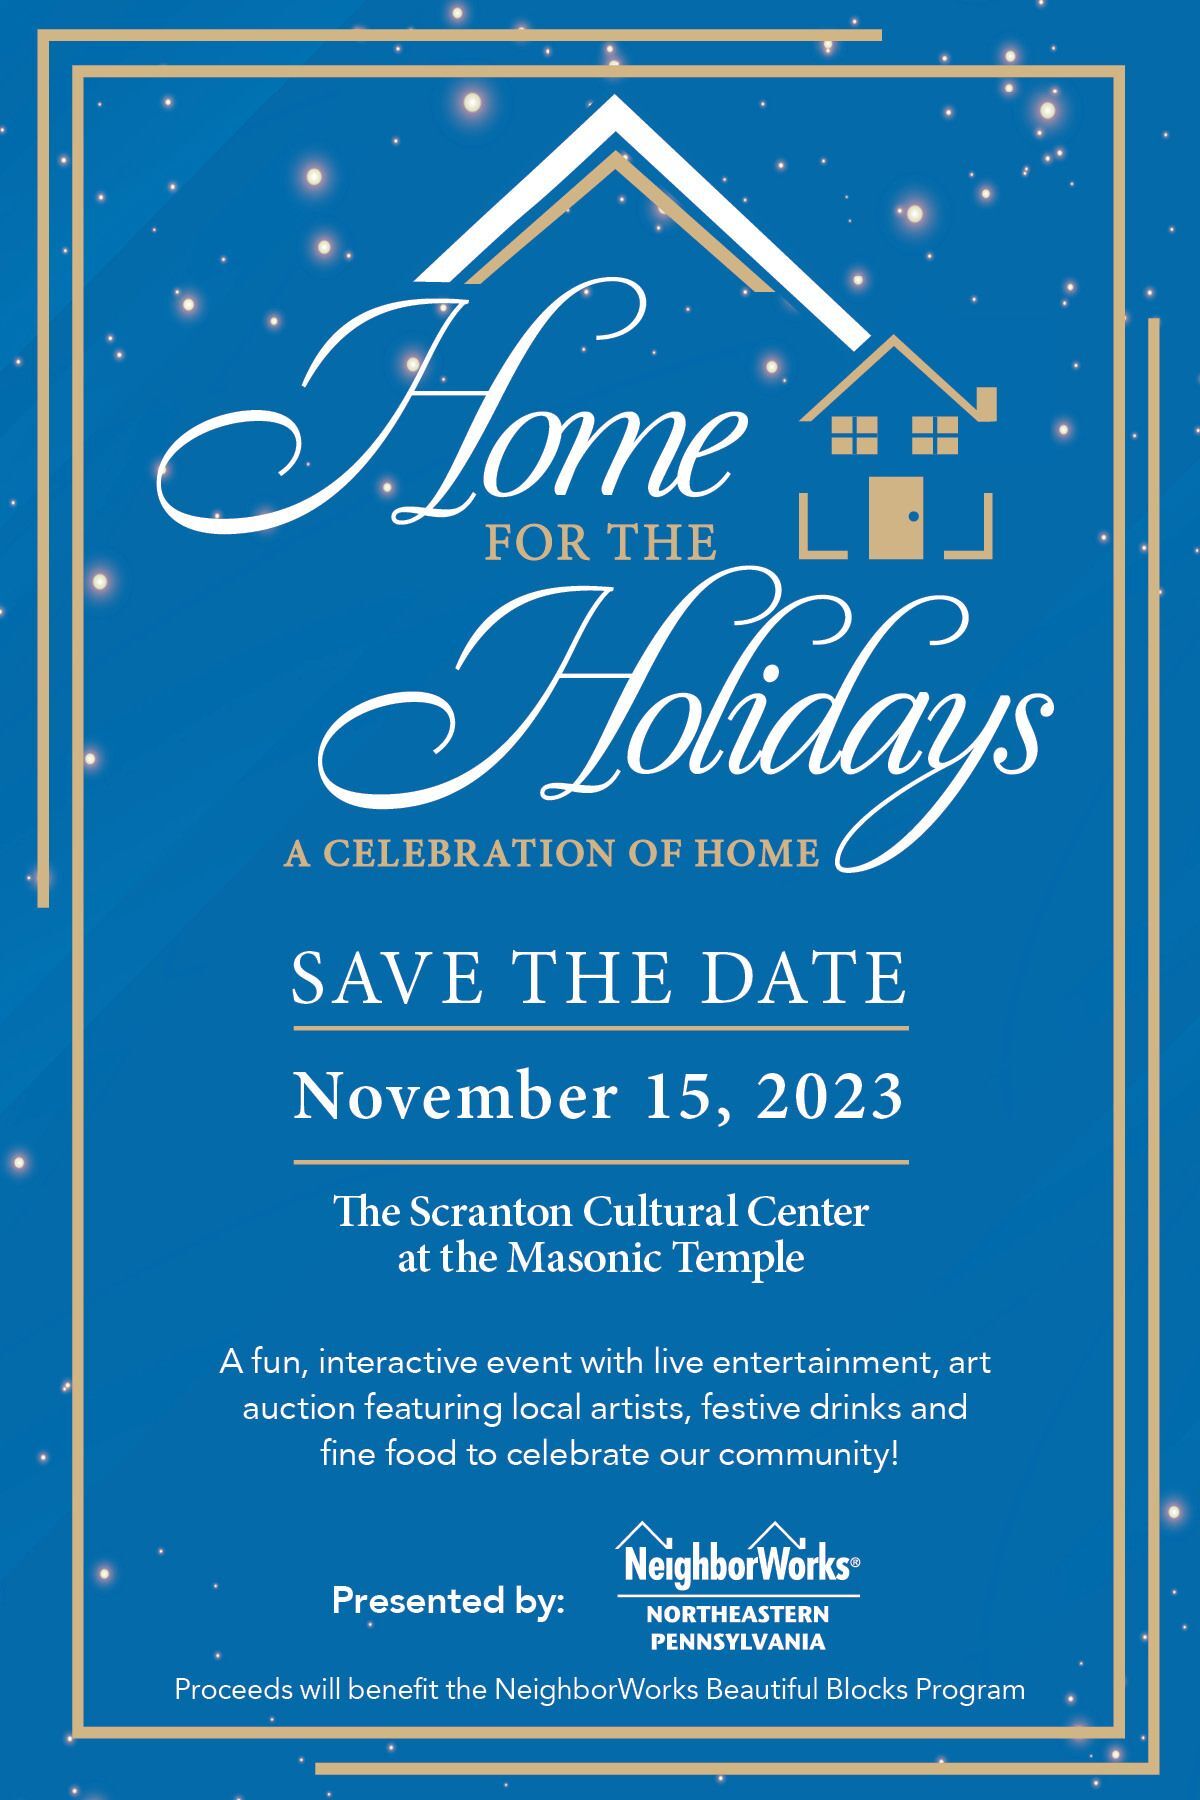 Join NeighborWorks at Home for the Holidays